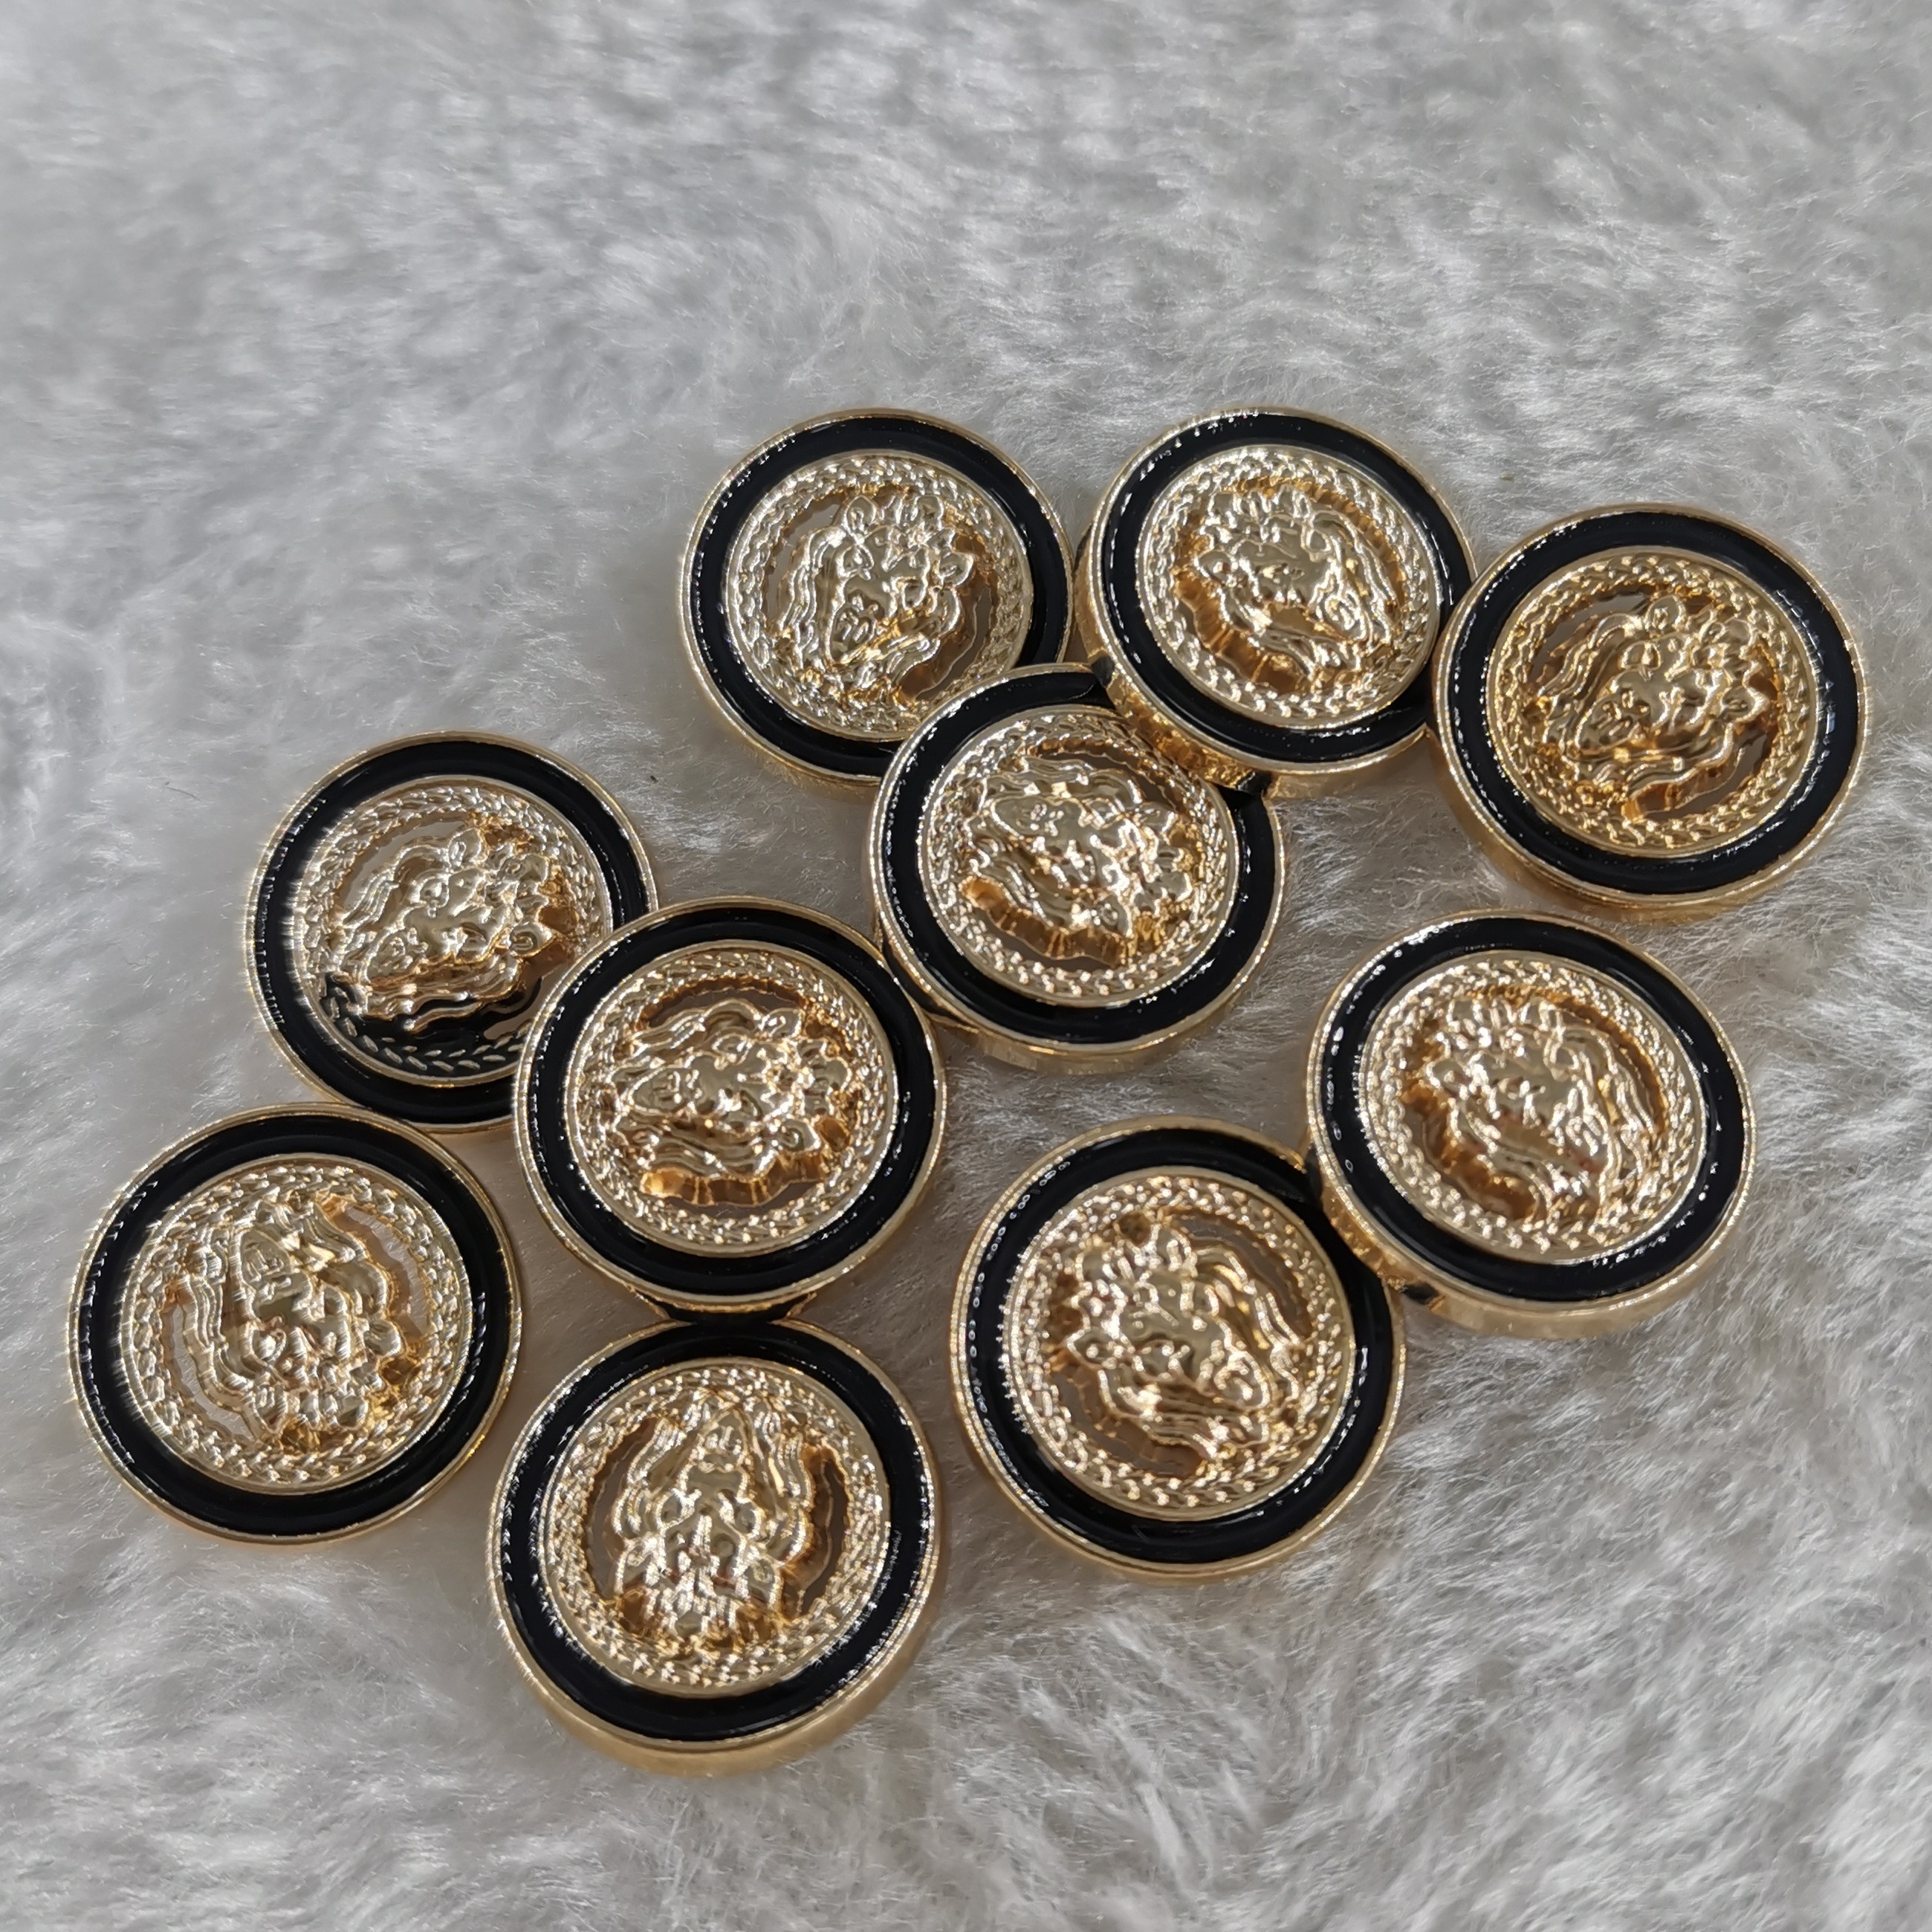 

10pcs Zinc Alloy Lion Head Pattern Hand-sewn Button, Fashion Women's Coat Accessories Buttons, Made Sturdy And Durable, Dripping Oil Process 1.7cm/0.67in